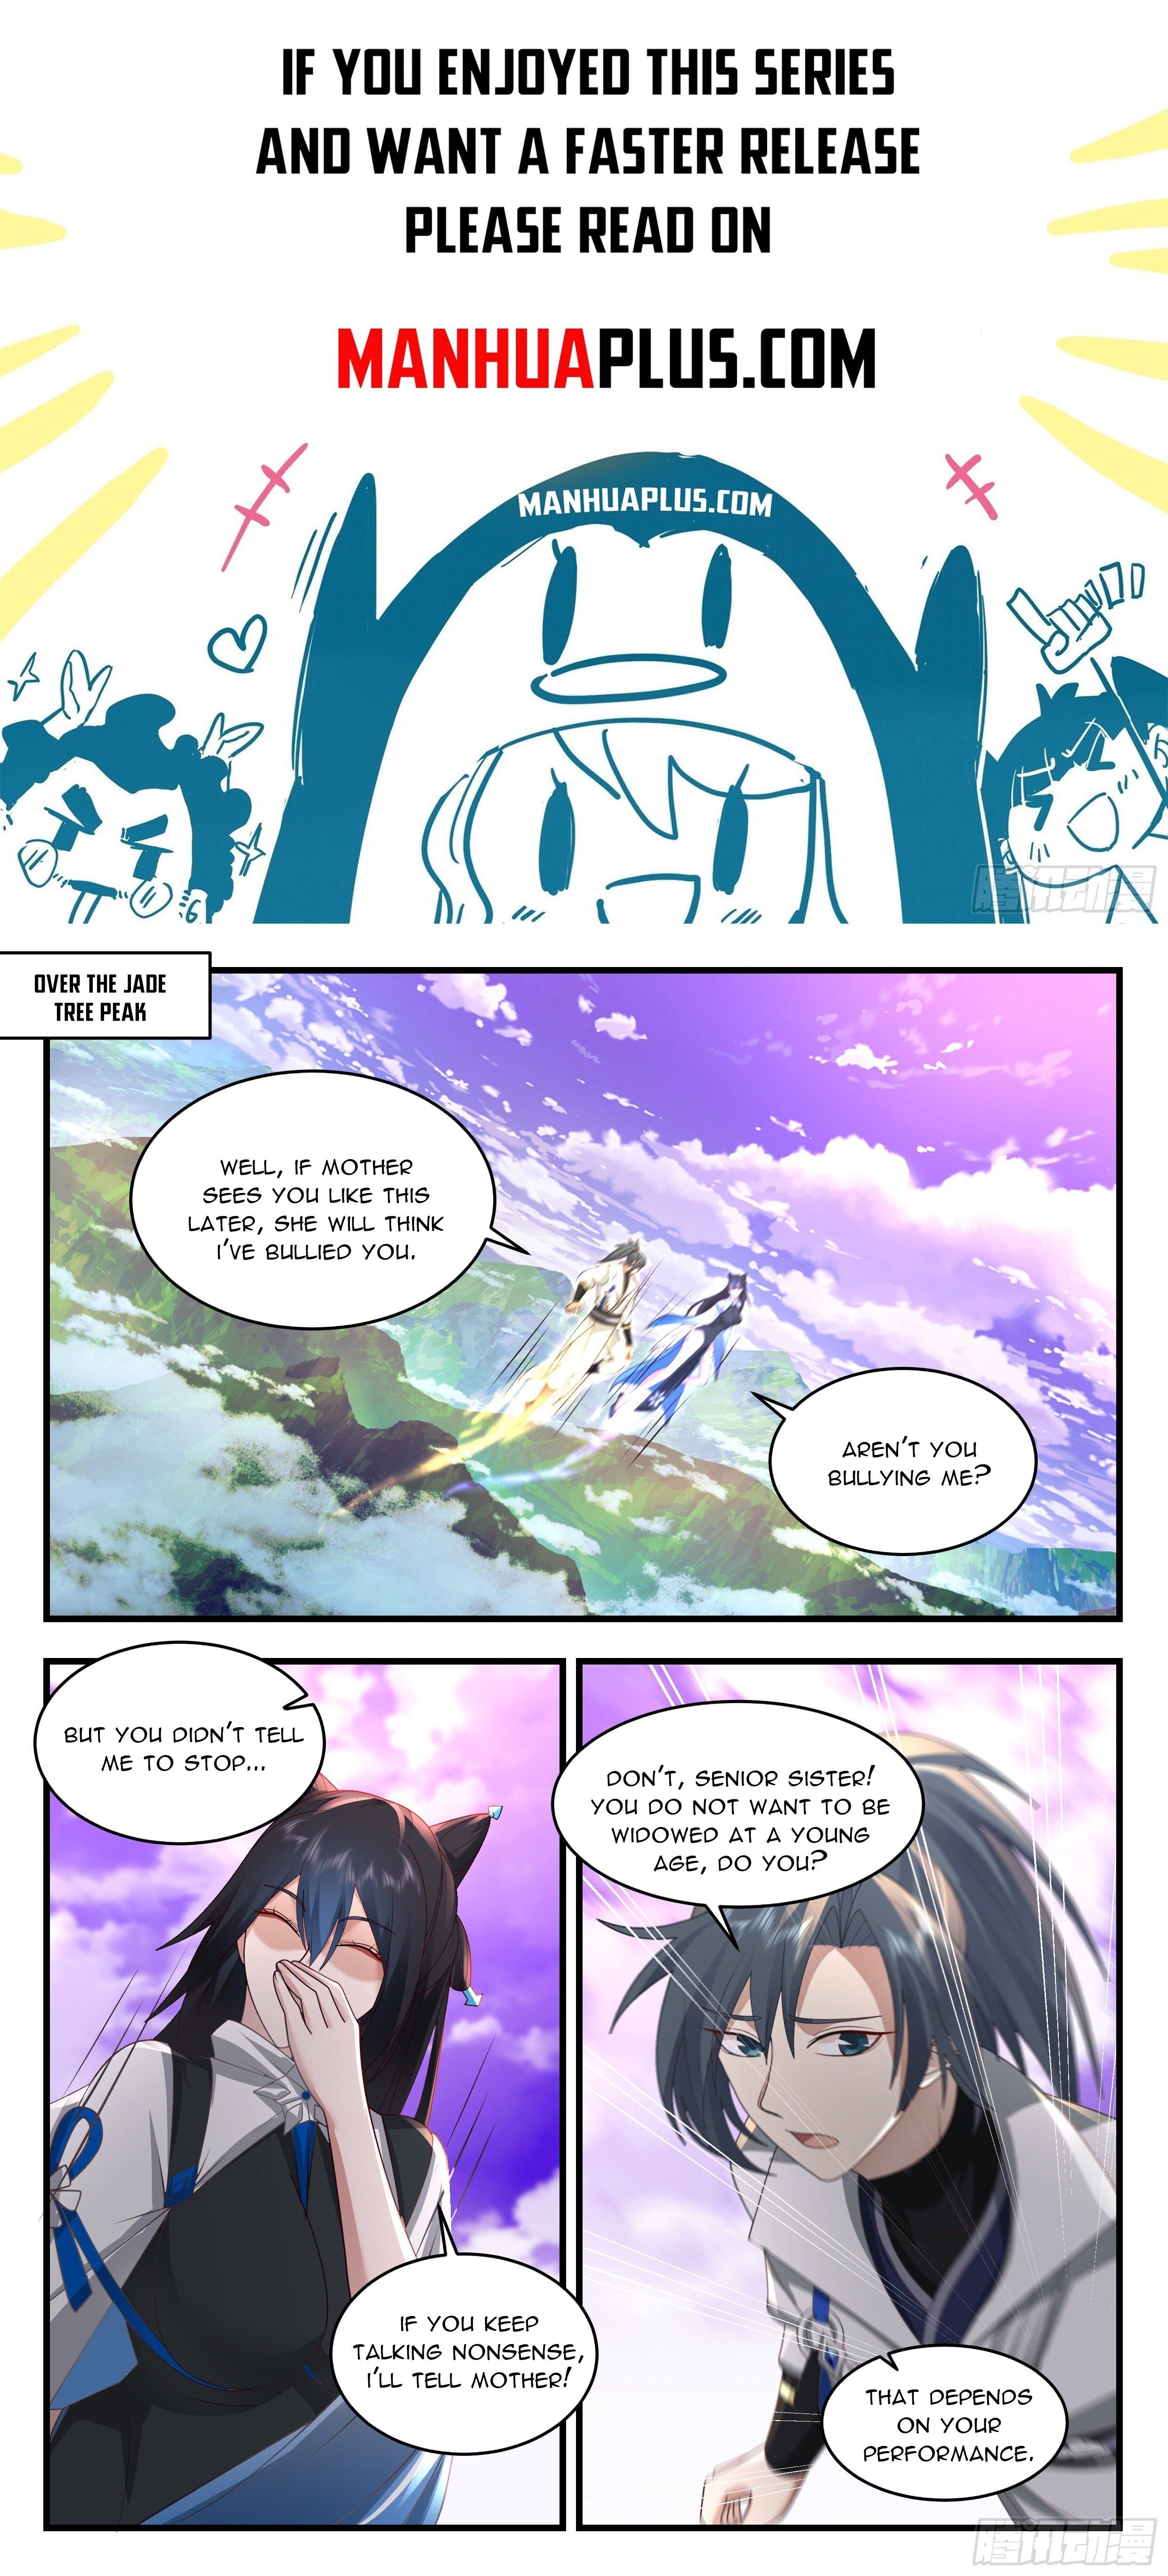 Martial Peak - Chapter 14472 - Paying respects to parents - Image 1